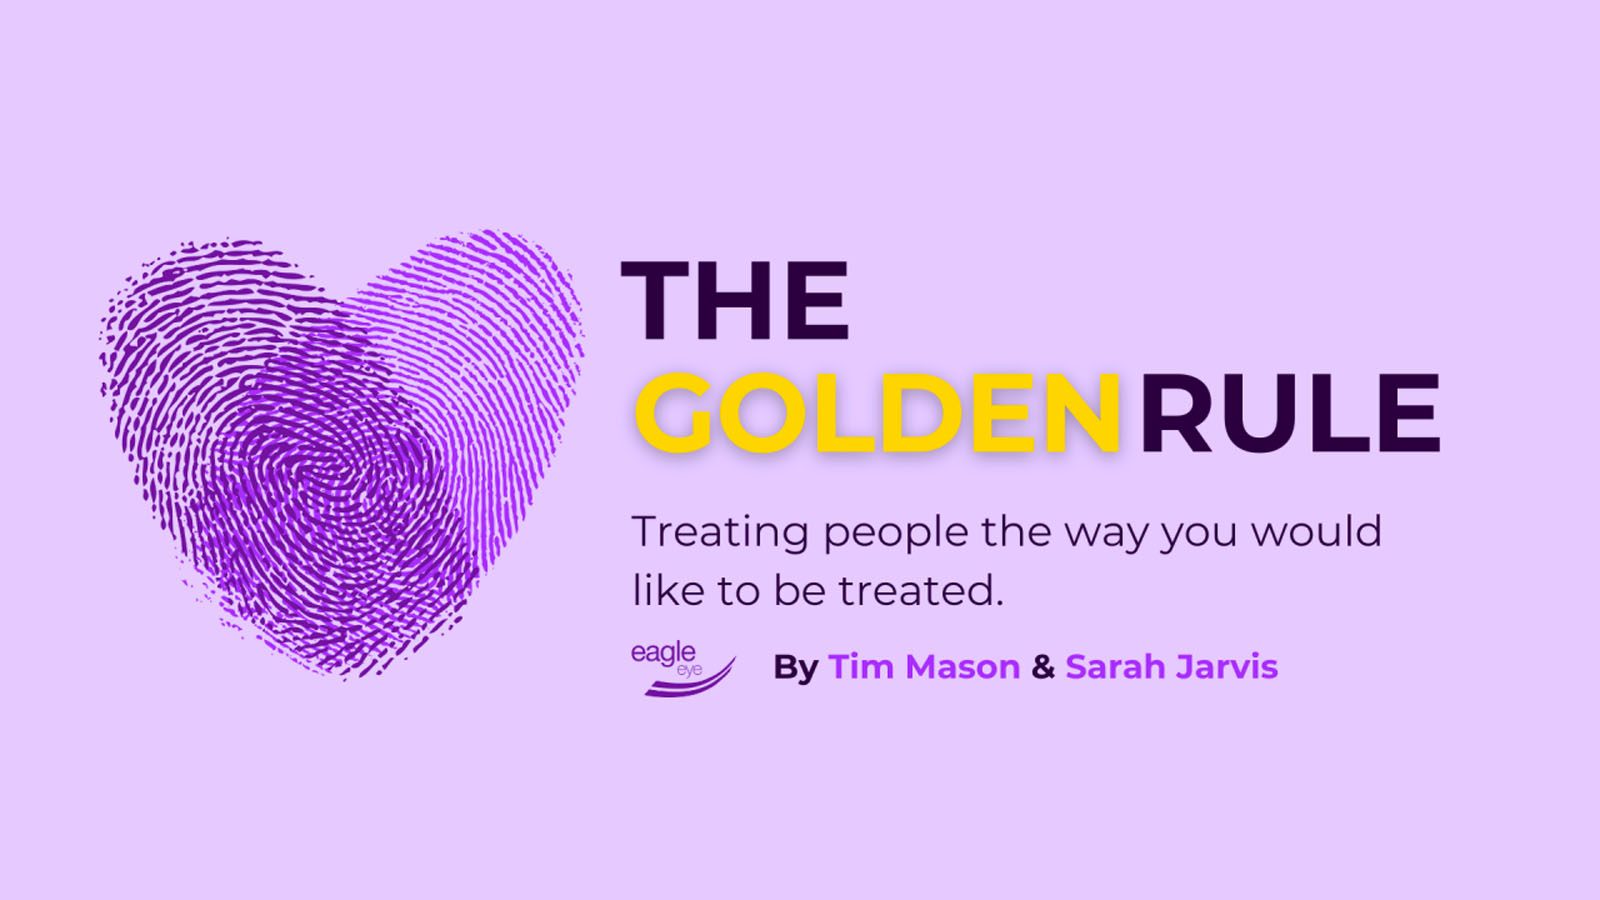 The Golden Rule blog series